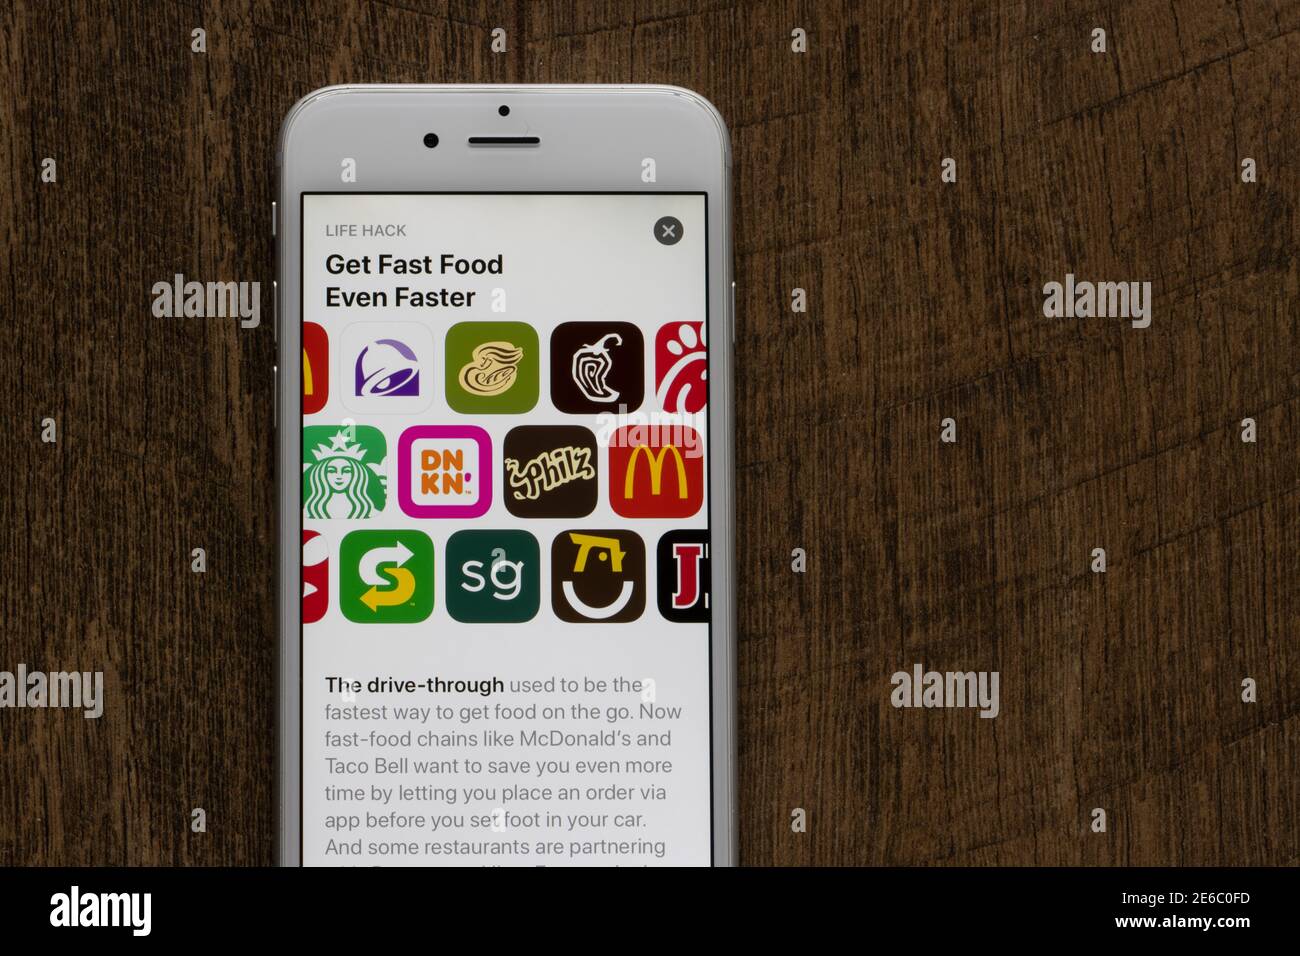 Assorted Fast Food apps are seen on an iPhone - McDonald's, Taco Bell, Panera Bread, Chipotle, Chick-fil-A, Starbucks, Dunkin', Philz Coffee, and etc. Stock Photo